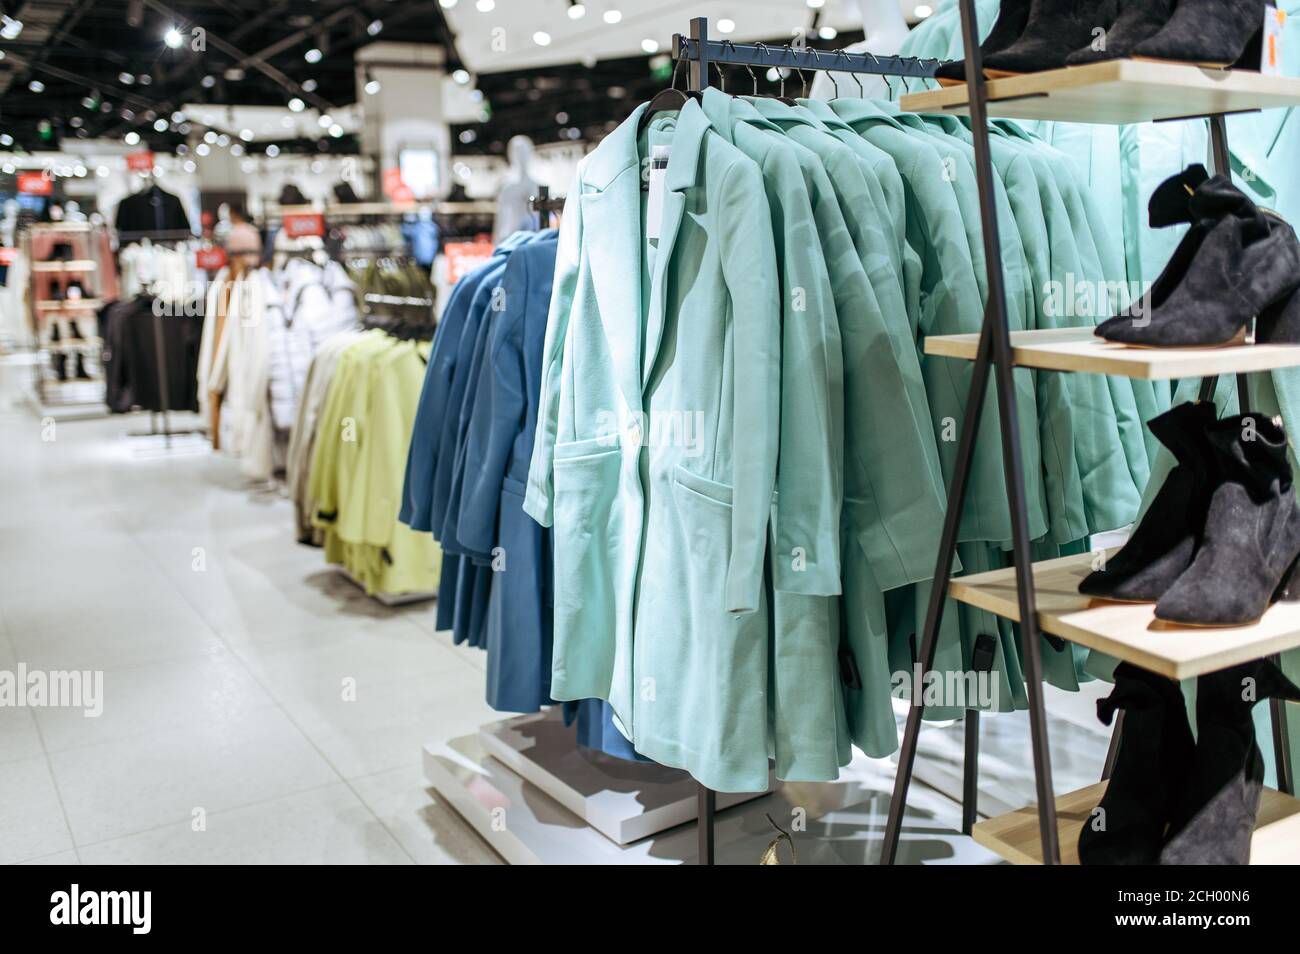 https://c8.alamy.com/comp/2CH00N6/clothes-coats-on-racks-in-clothing-store-nobody-2CH00N6.jpg